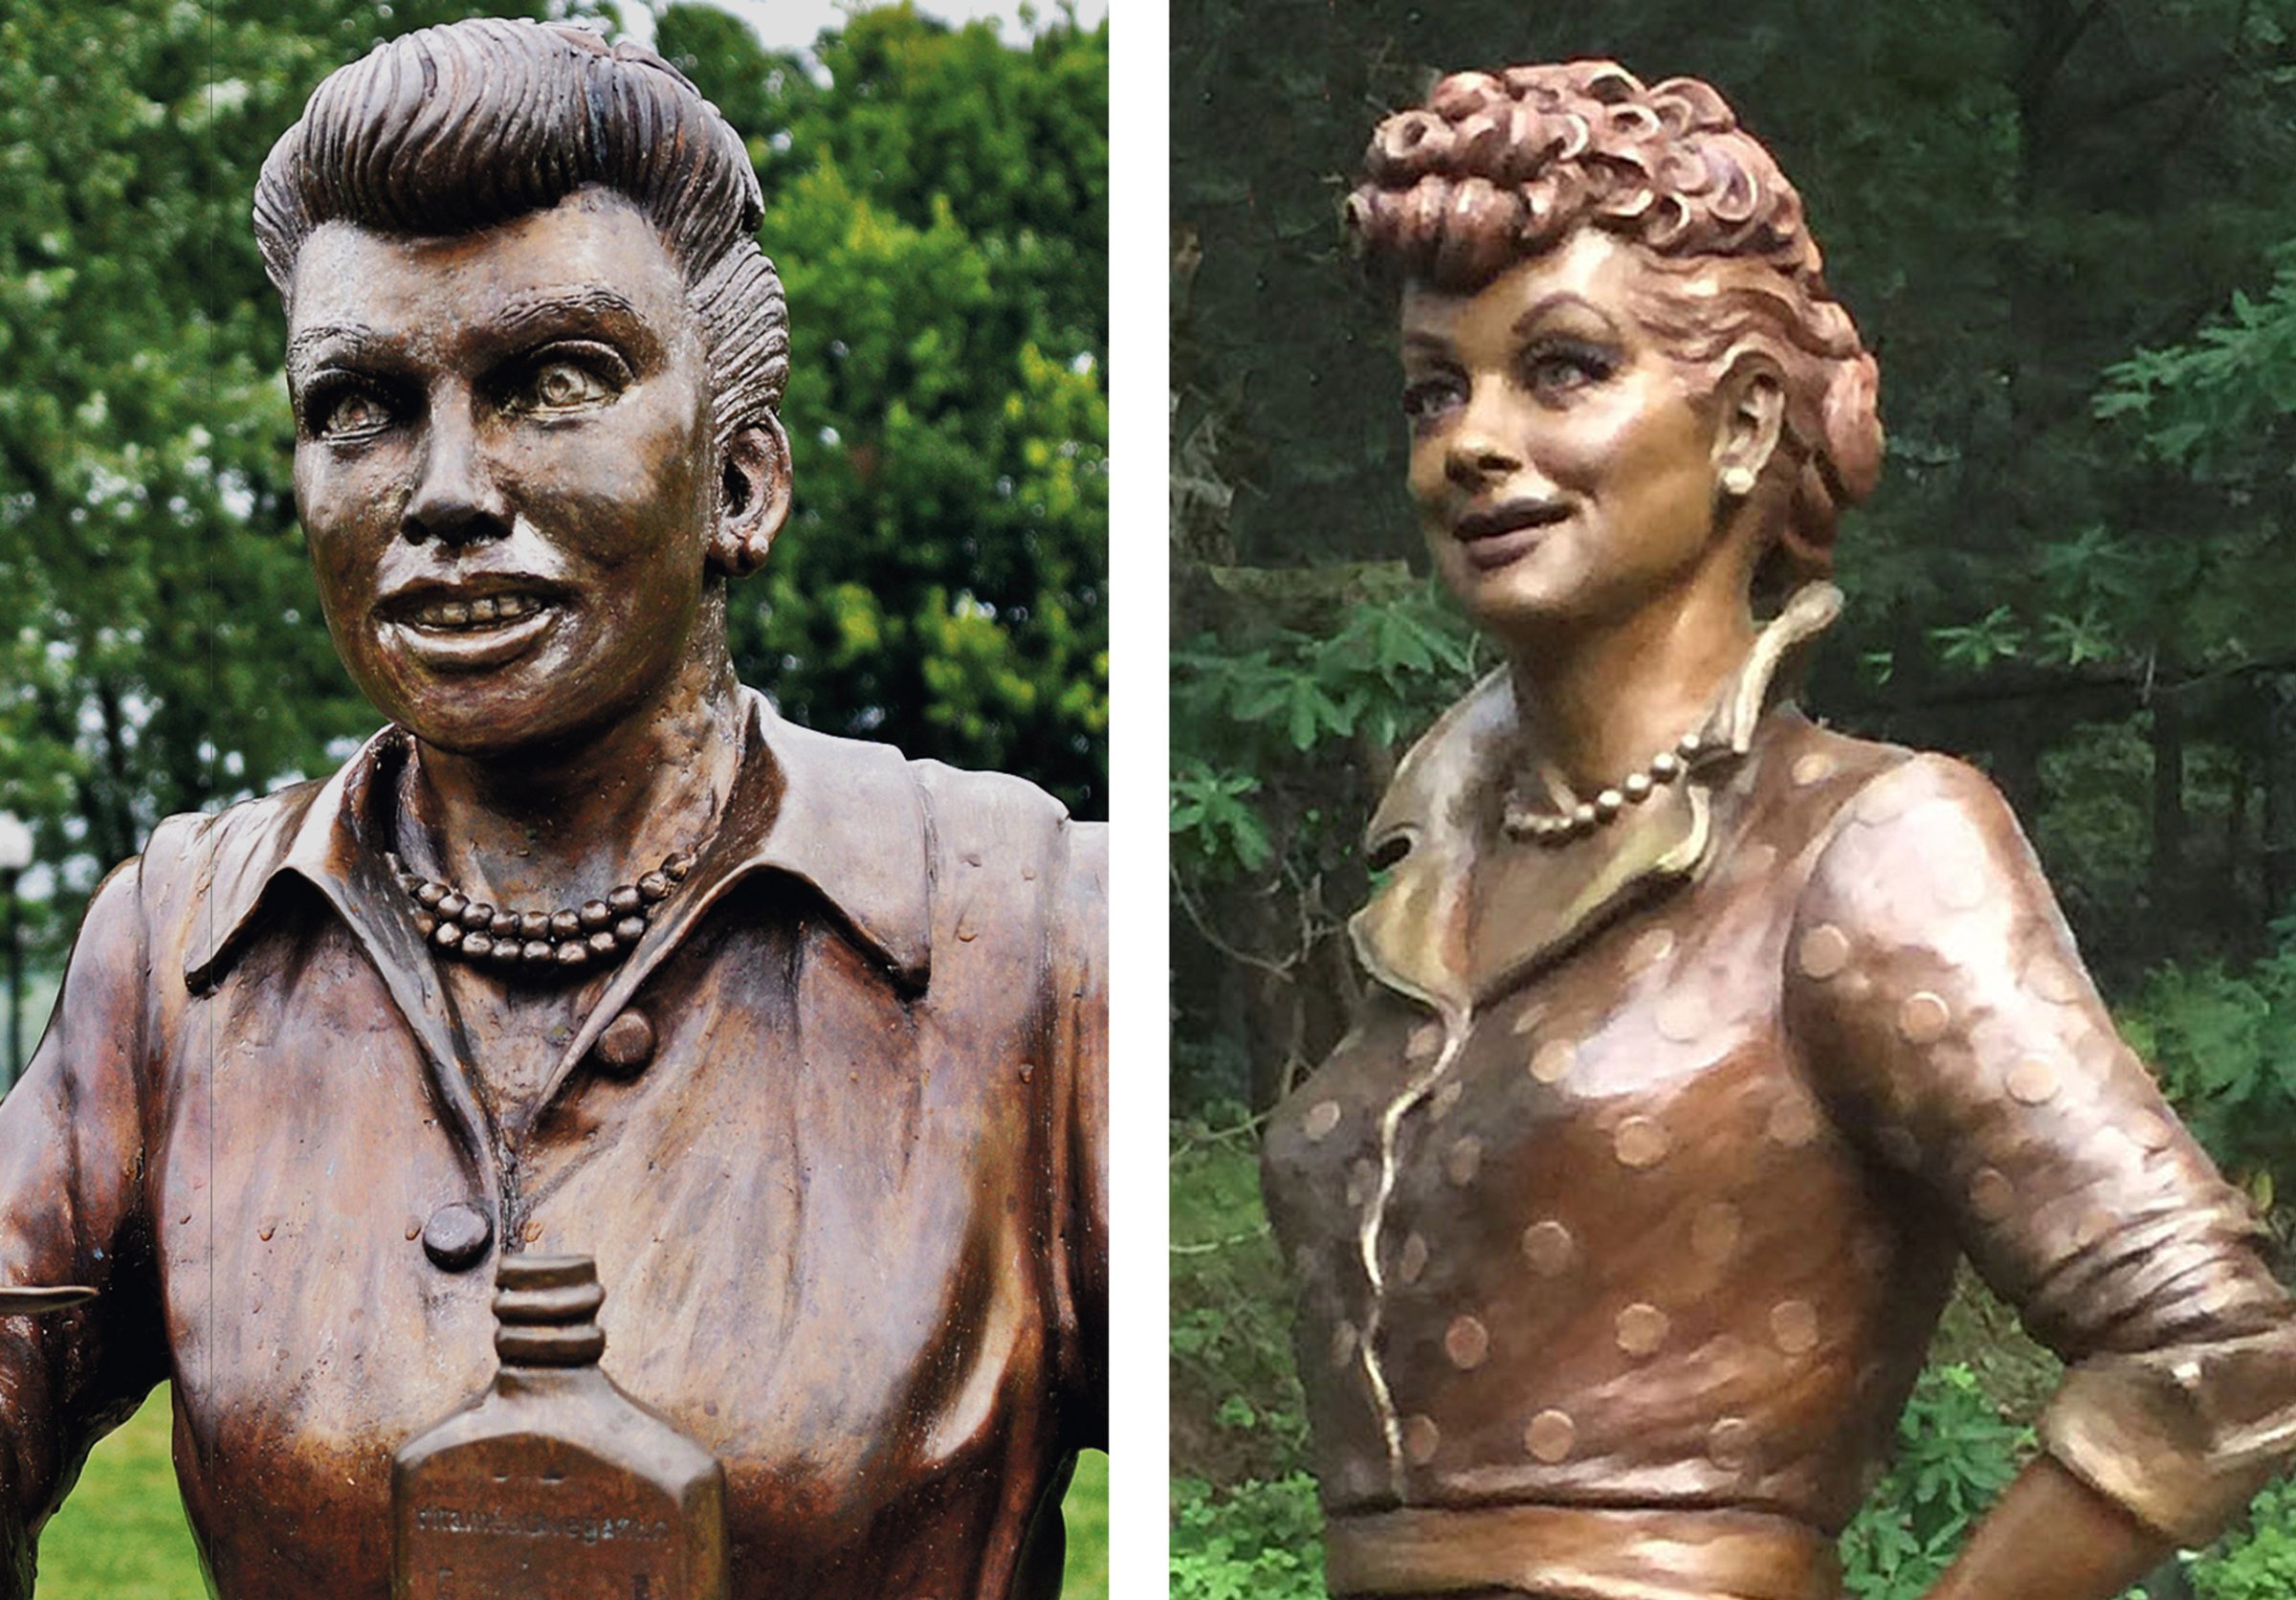 Left: The bronze sculpture of Lucille Ball by Dave Poulin, seen at the Lucille Ball Memorial Park in Celoron, N.Y.. in Aug. 2012; Right the bronze sculpture of Lucille Ball by Carolyn D. Palmer, unveiled at the Lucille Ball Memorial Park in Celeron, N.Y., on Aug. 6, 2016.